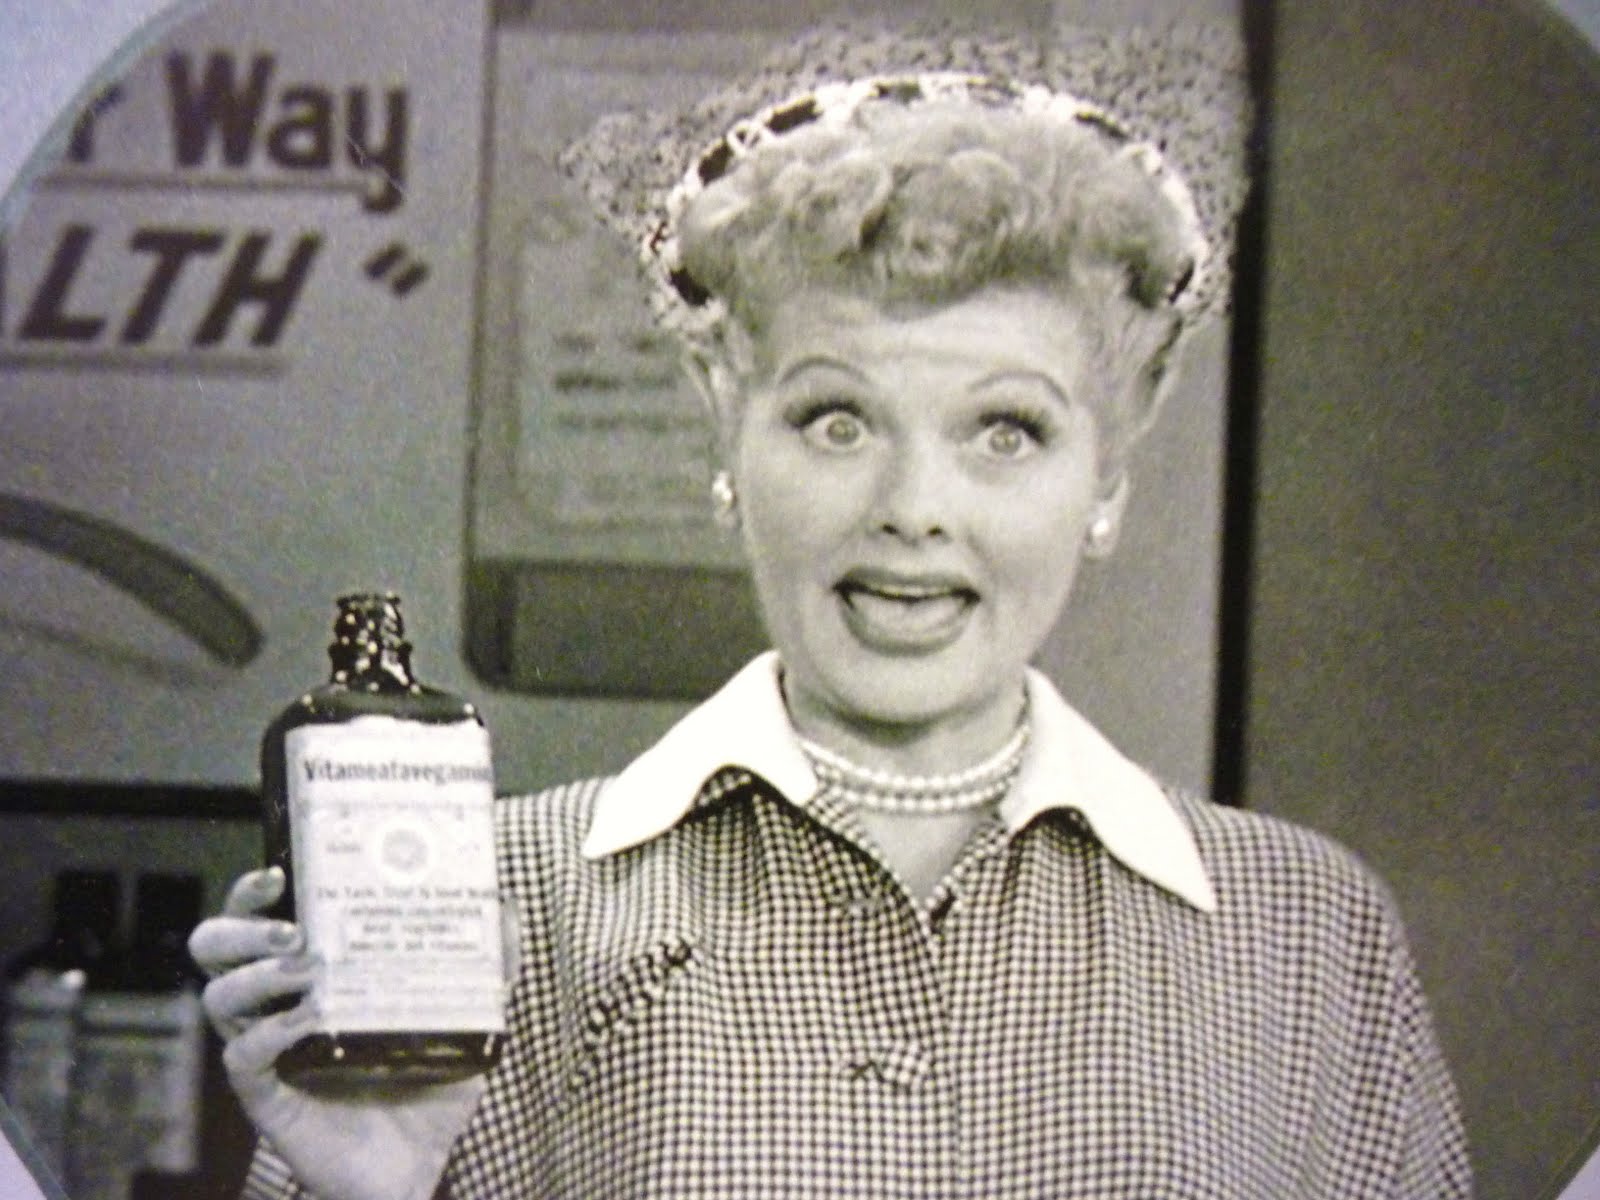 Wallpaper I Love Lucy Wallpapers